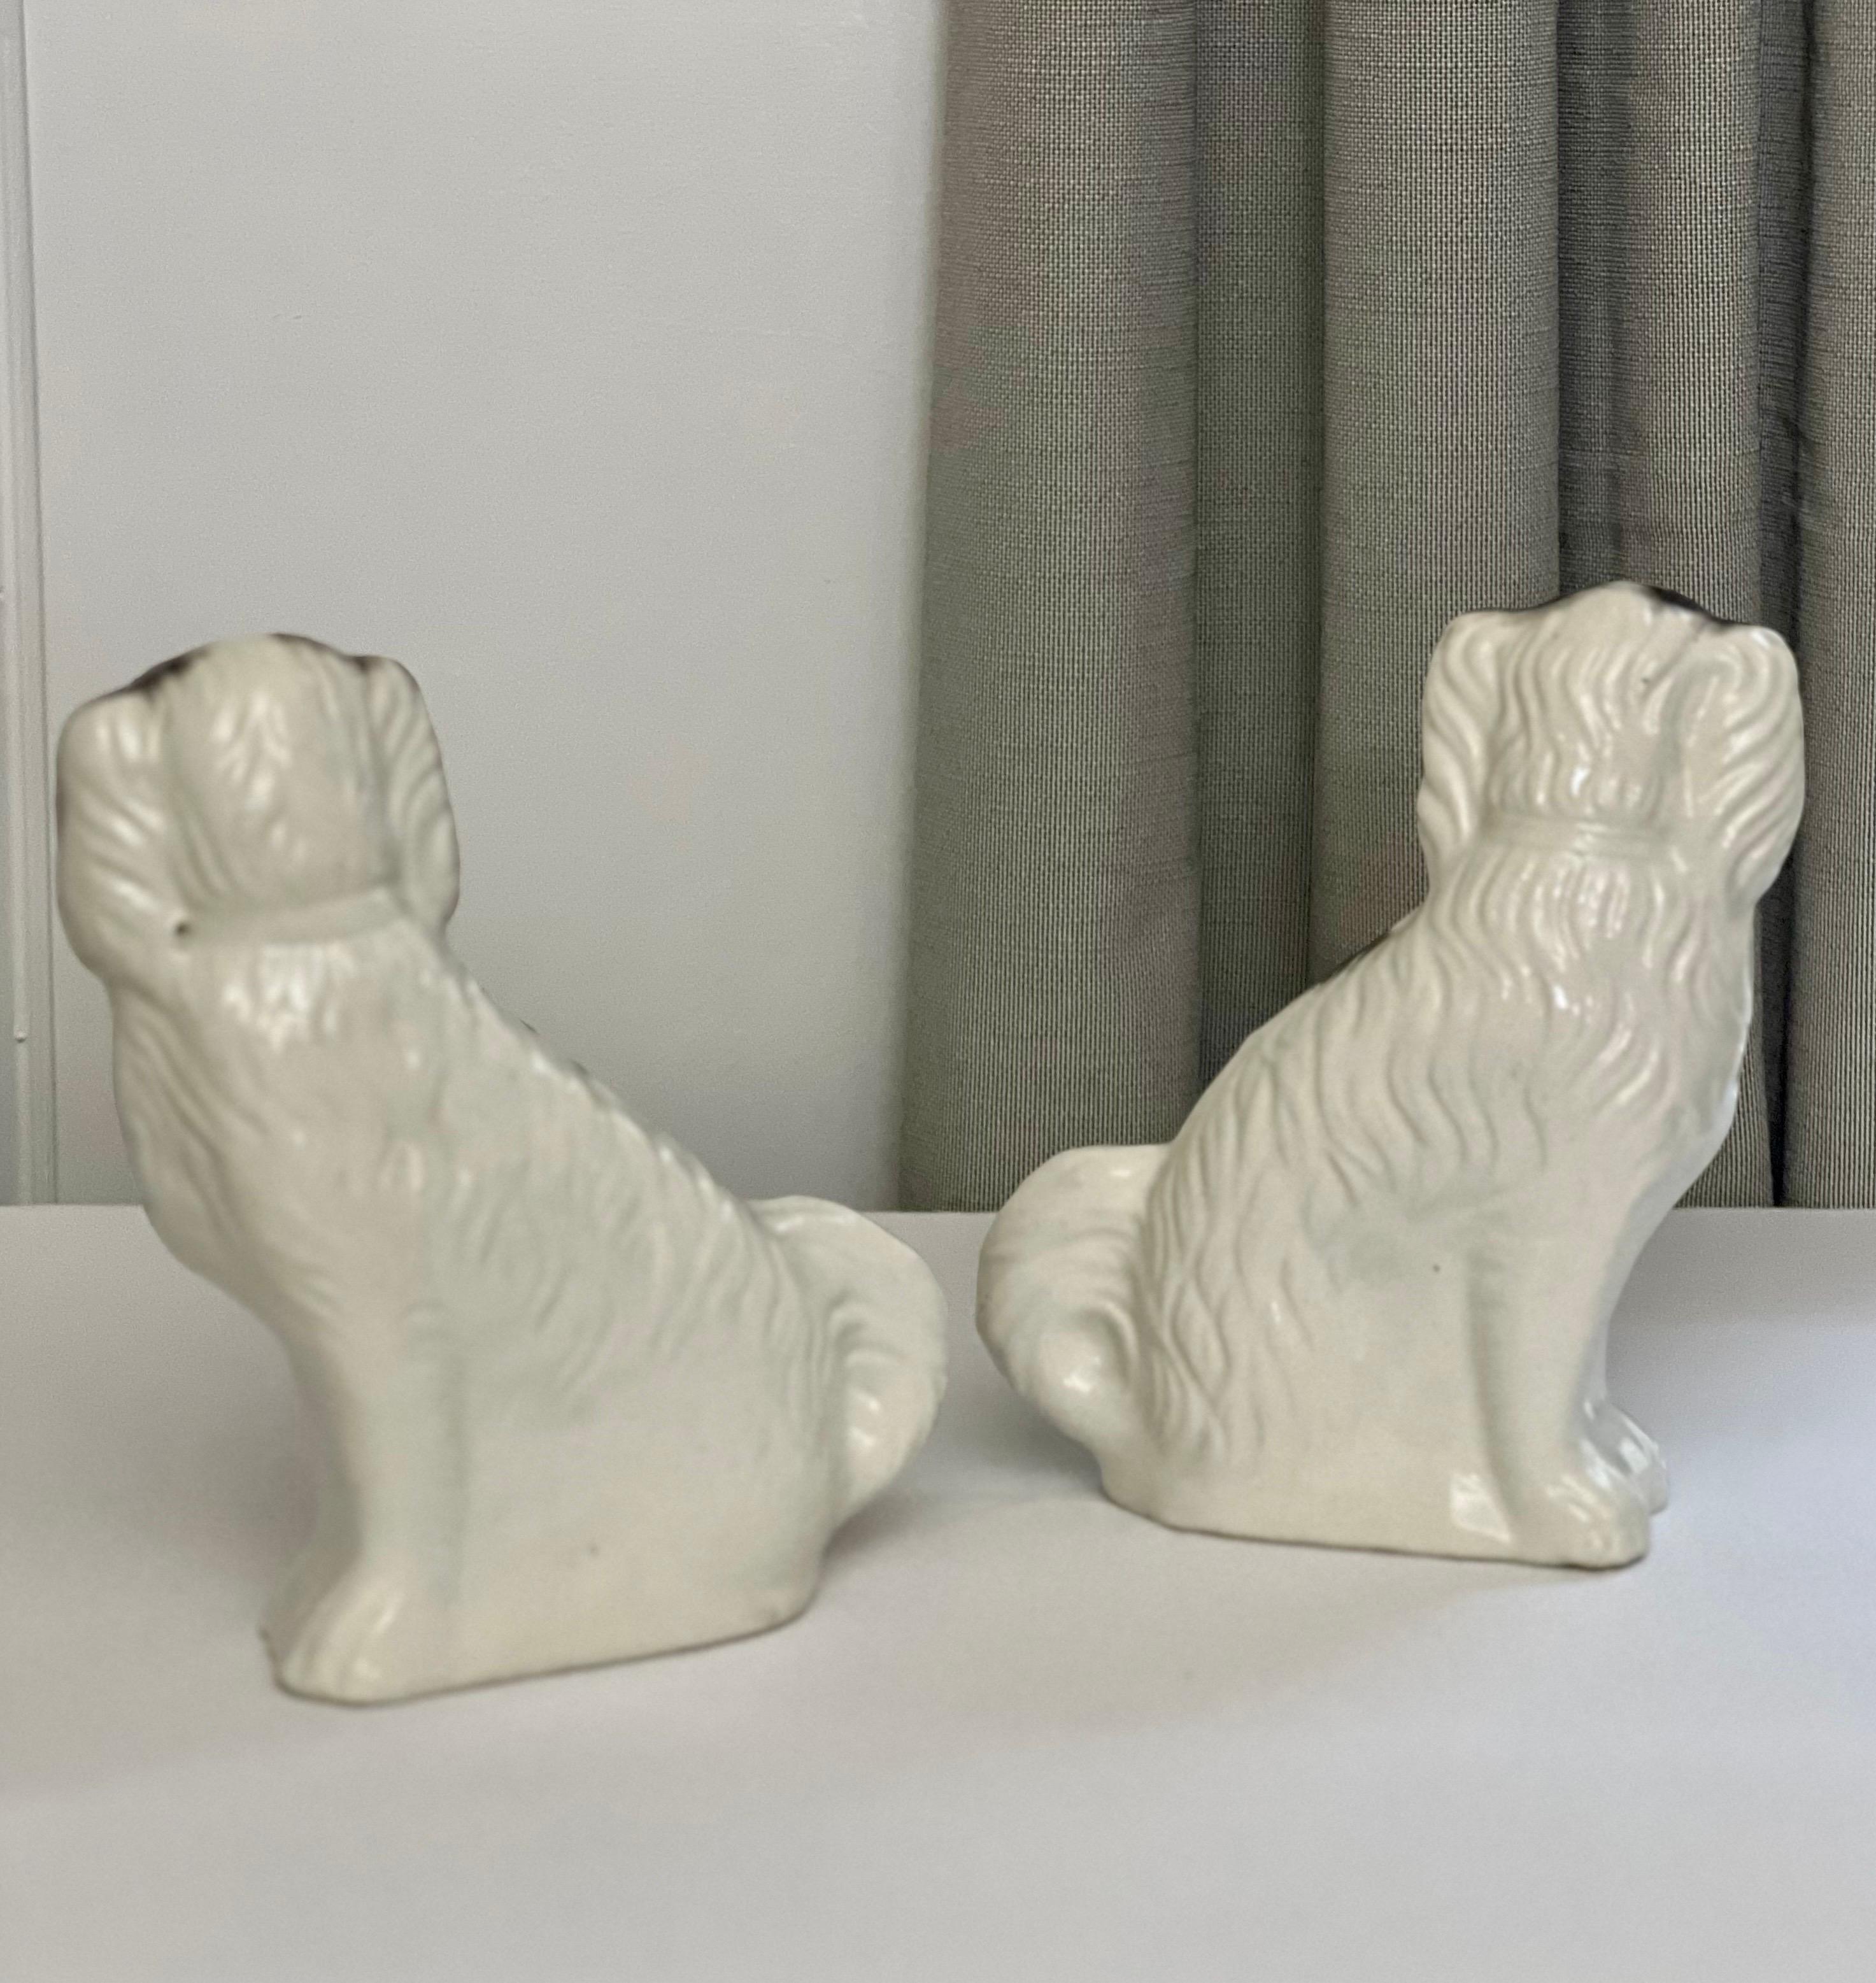 Early 20th Century English Staffordshire Spaniel Dog Figurines, Pair In Good Condition For Sale In Doylestown, PA